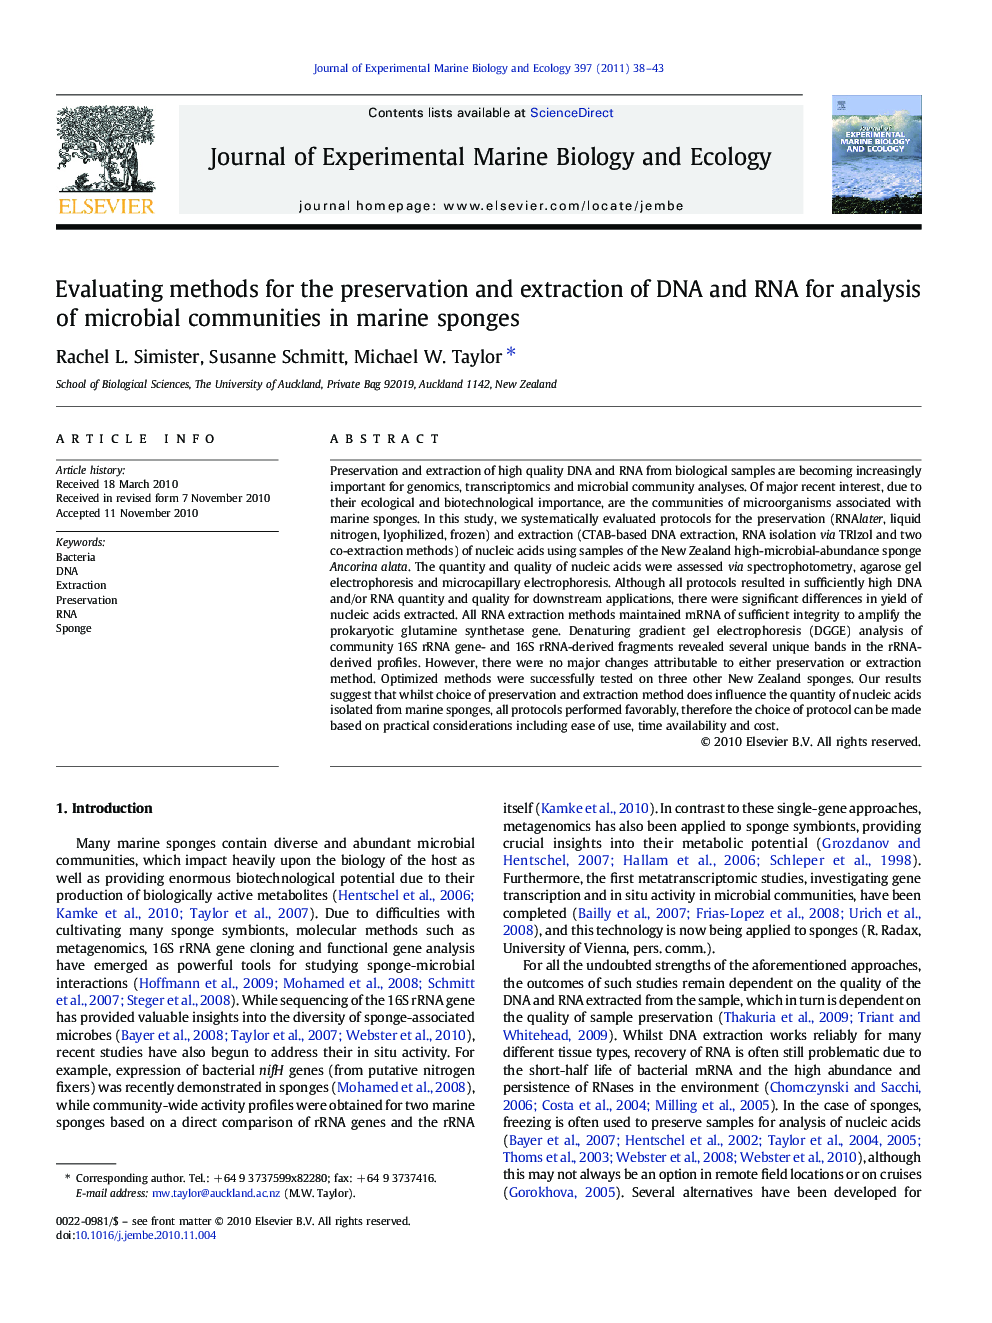 Evaluating methods for the preservation and extraction of DNA and RNA for analysis of microbial communities in marine sponges